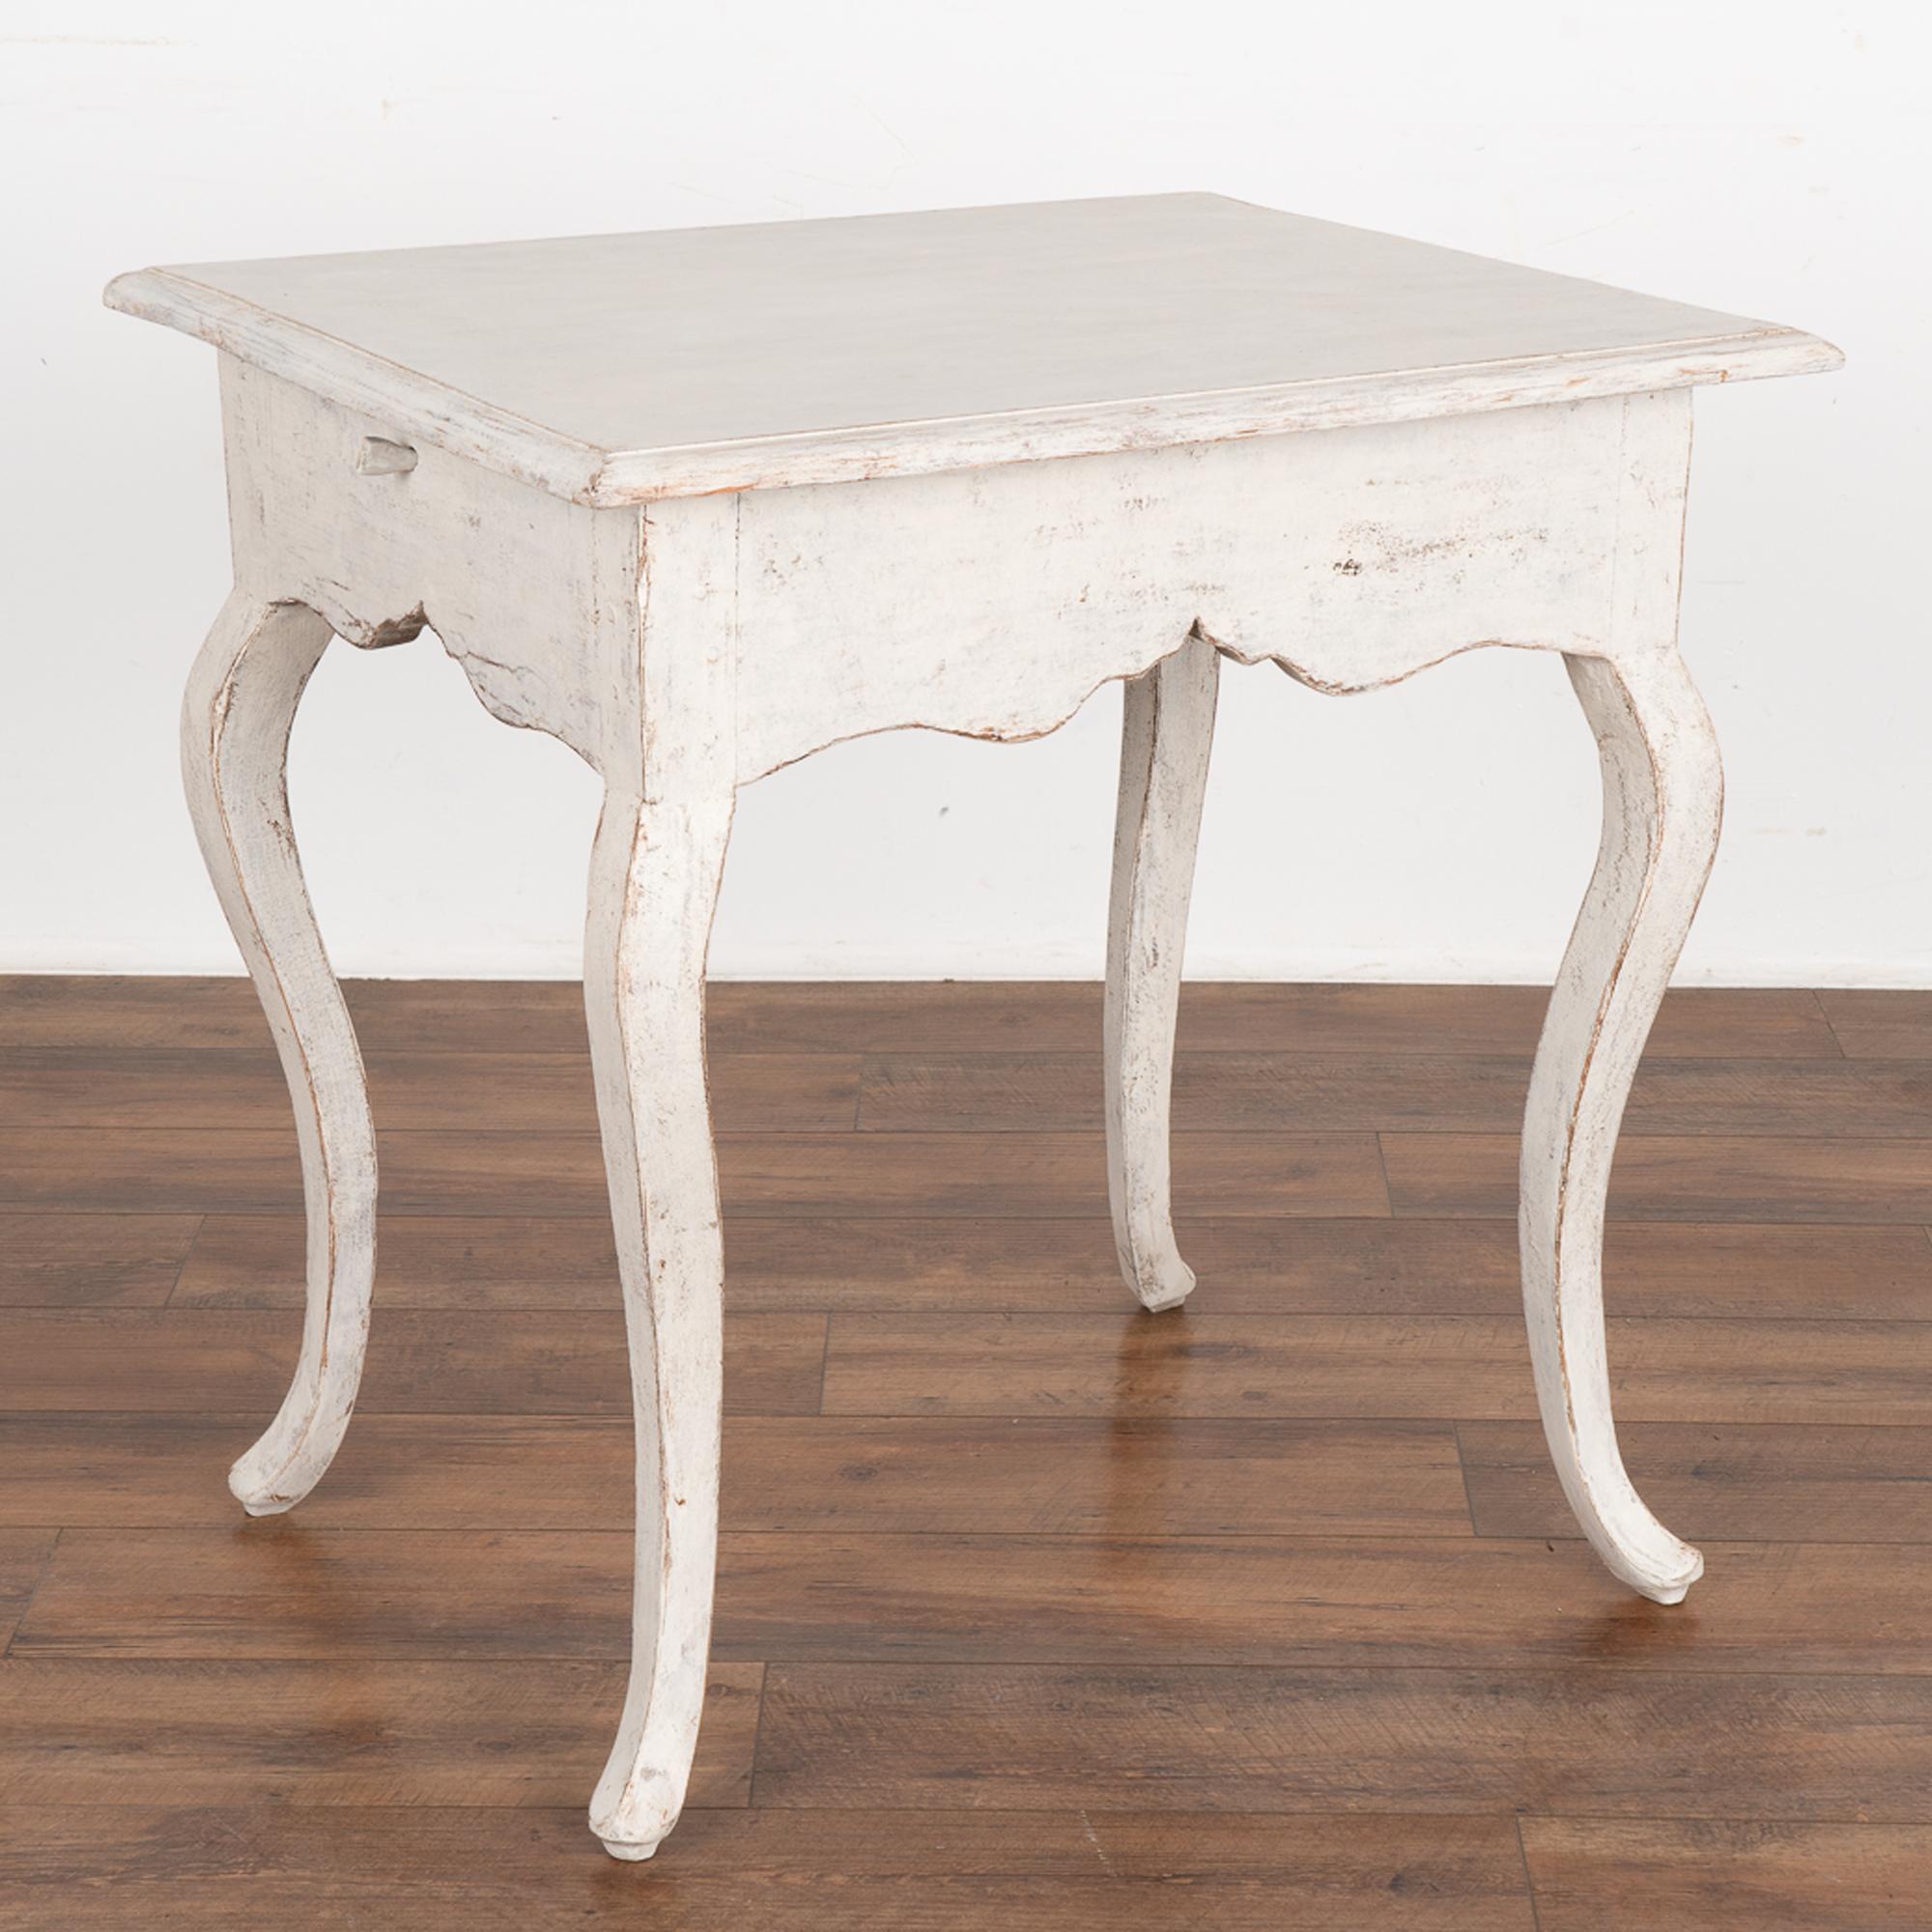 Swedish Gustavian side table with cabriolet legs and large scalloped skirt. 
Restored, later professionally painted in layered shades of white and gently distressed to compliment the age and grace of this lovely accent table. 
Any old nicks,